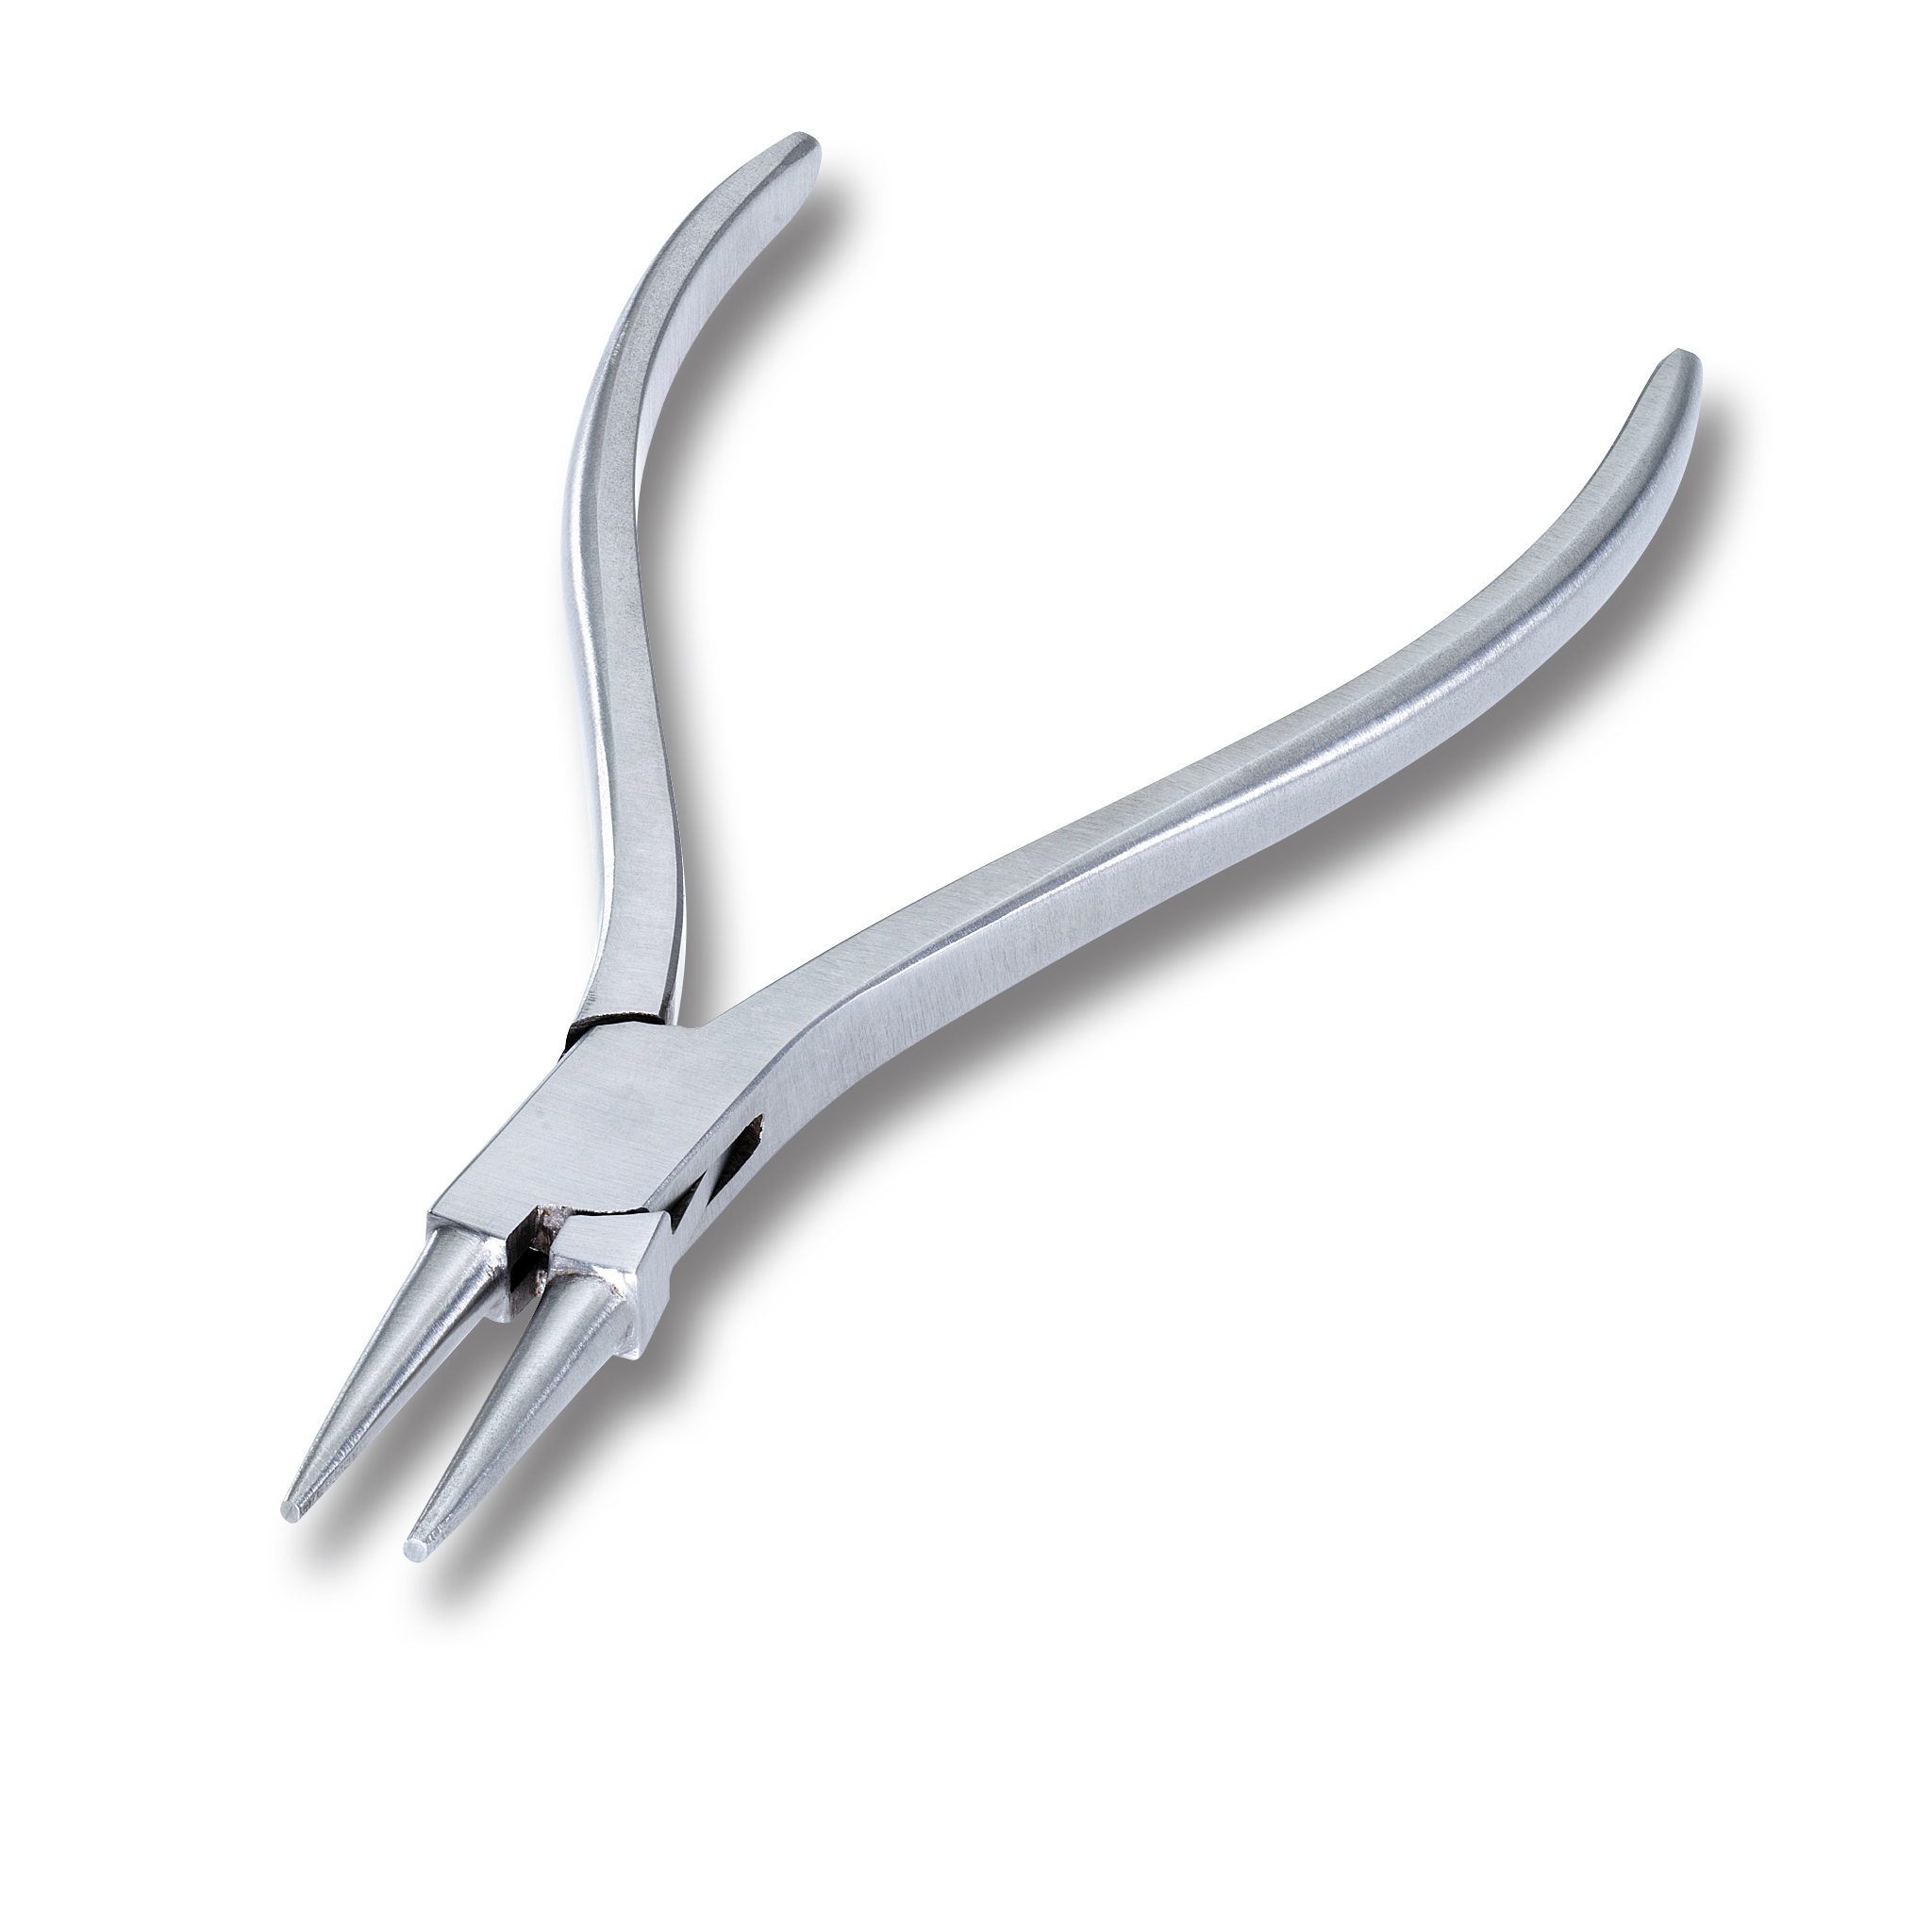 Watchmaker's round nose pliers with box joint.